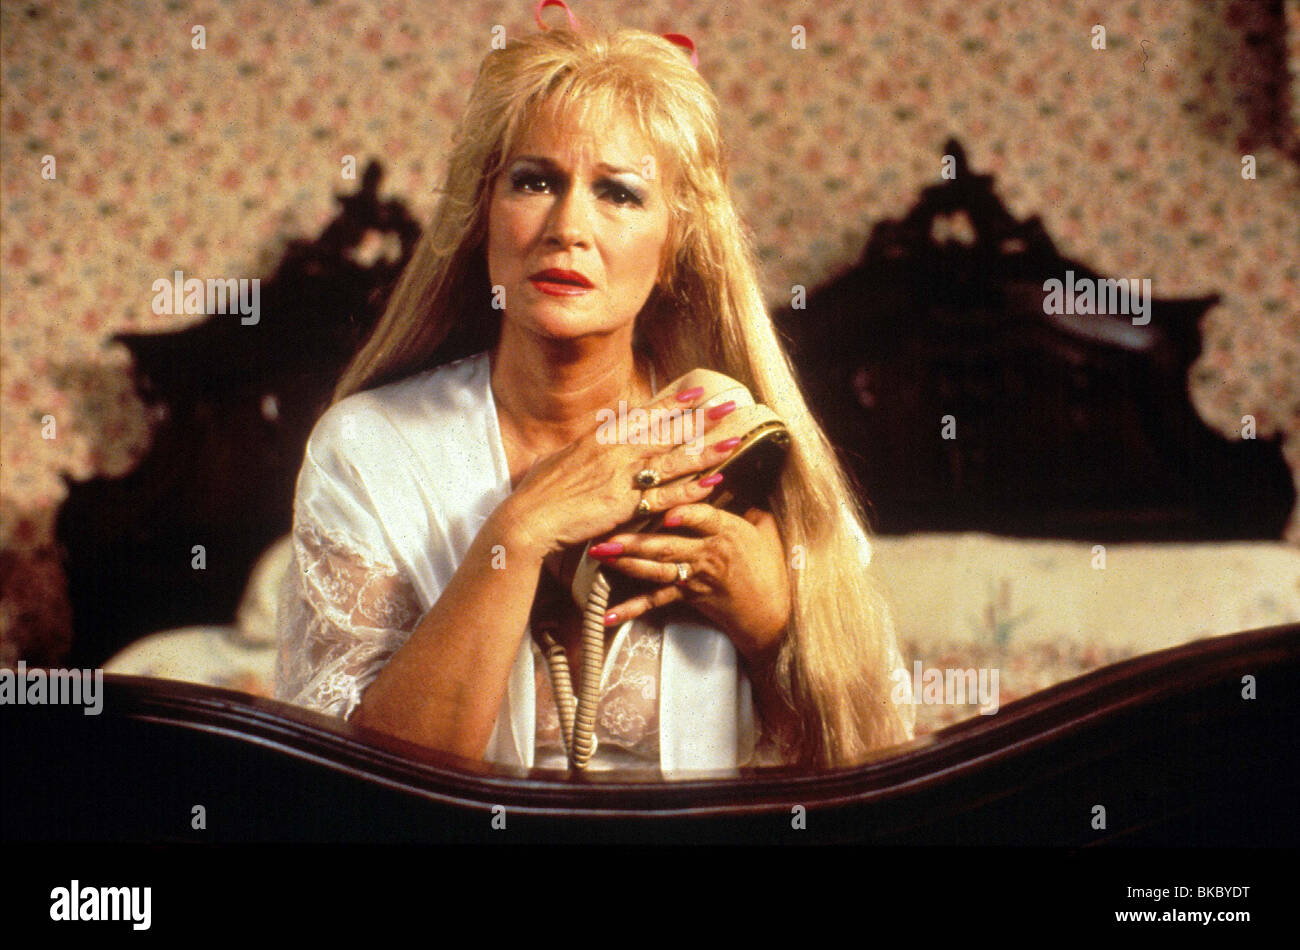 Wild At Heart 1990 Diane Ladd Stock Photos & Wild At Heart 1990 ...